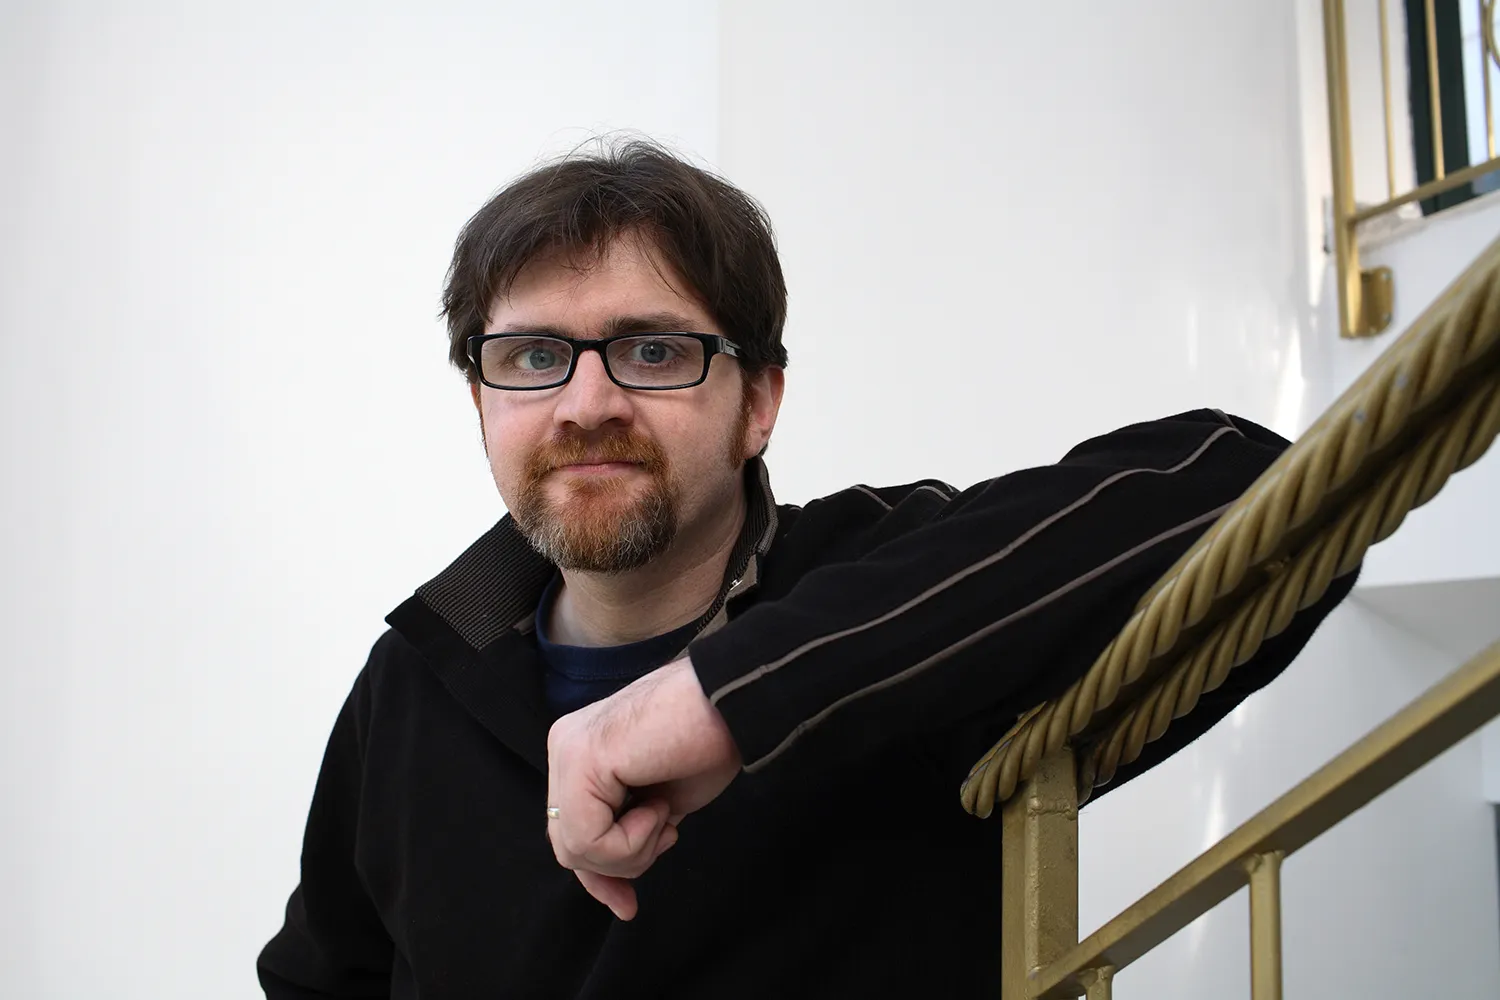 How rich is Ernest Cline?